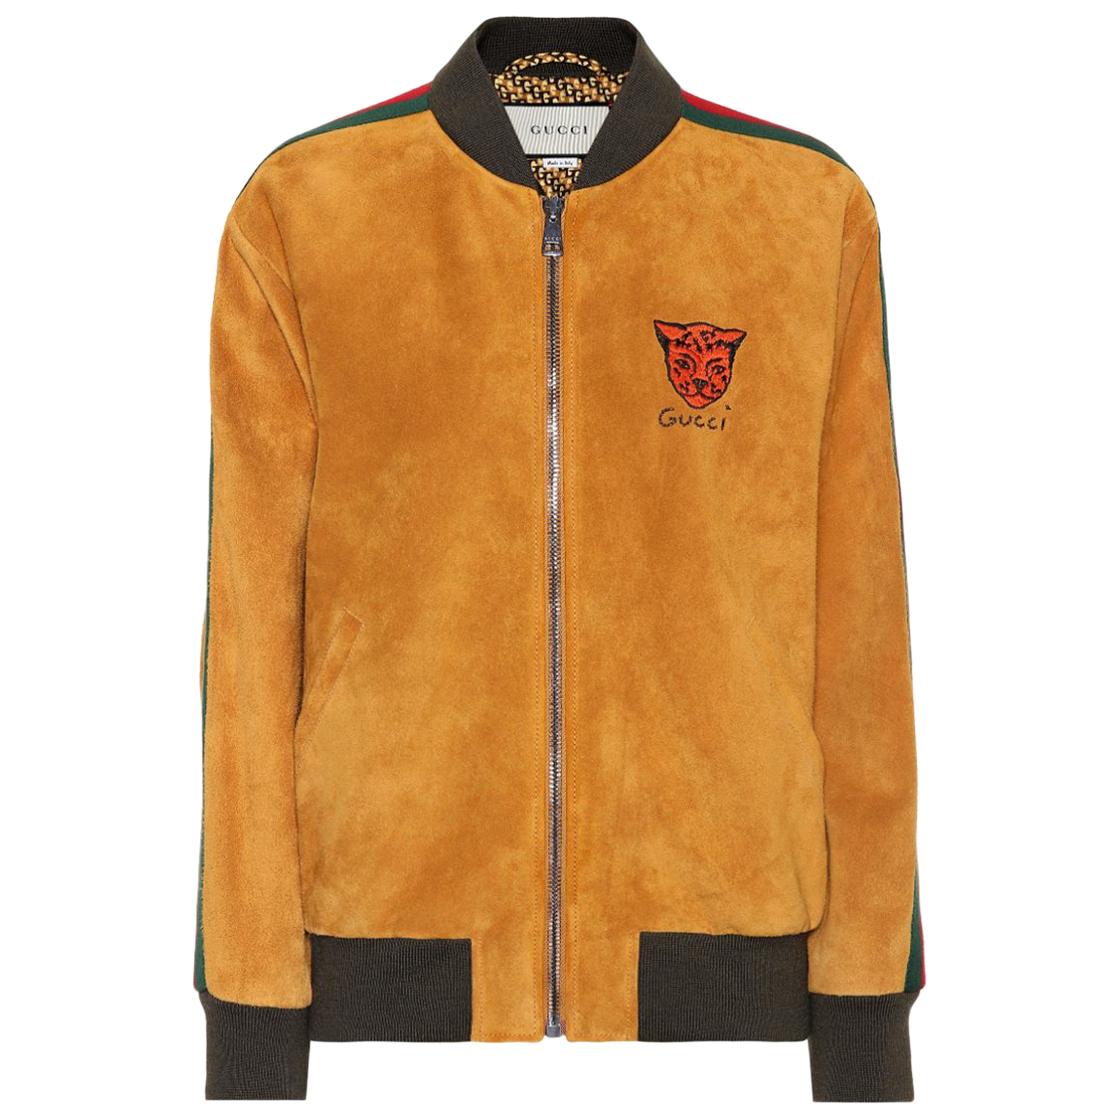 Gucci Embroidered Suede Bomber Jacket